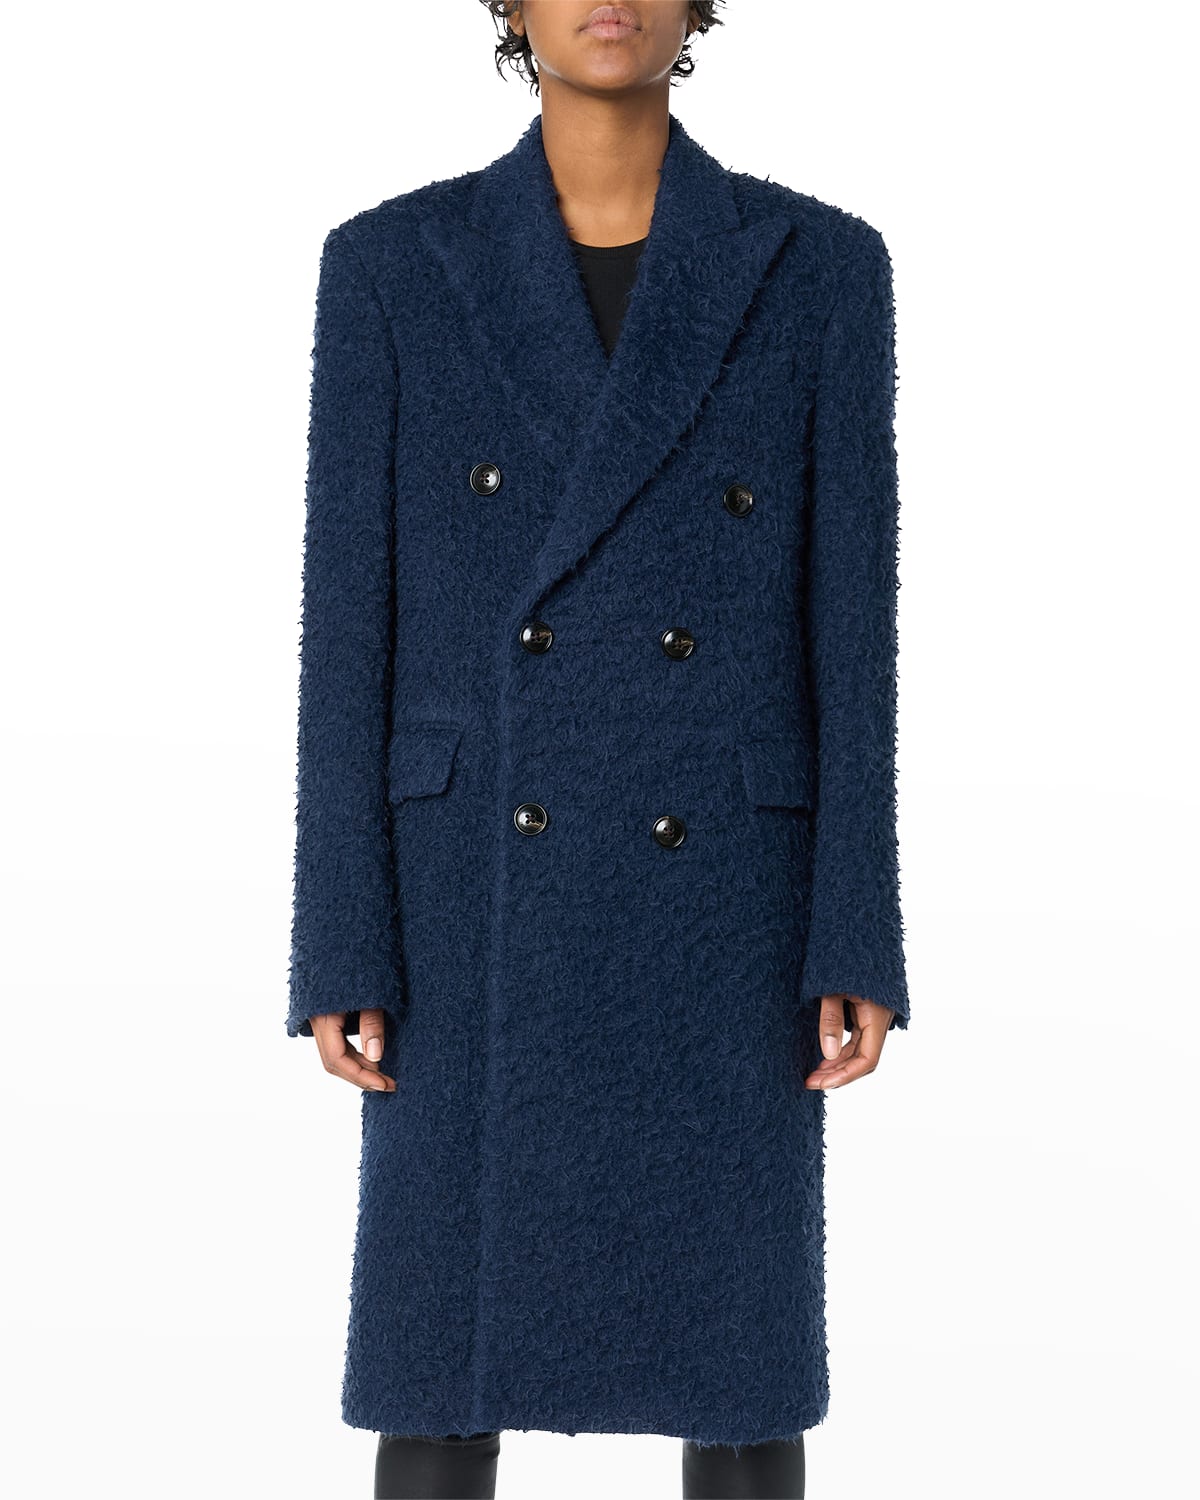 Textured Knit Double-Breasted Coat